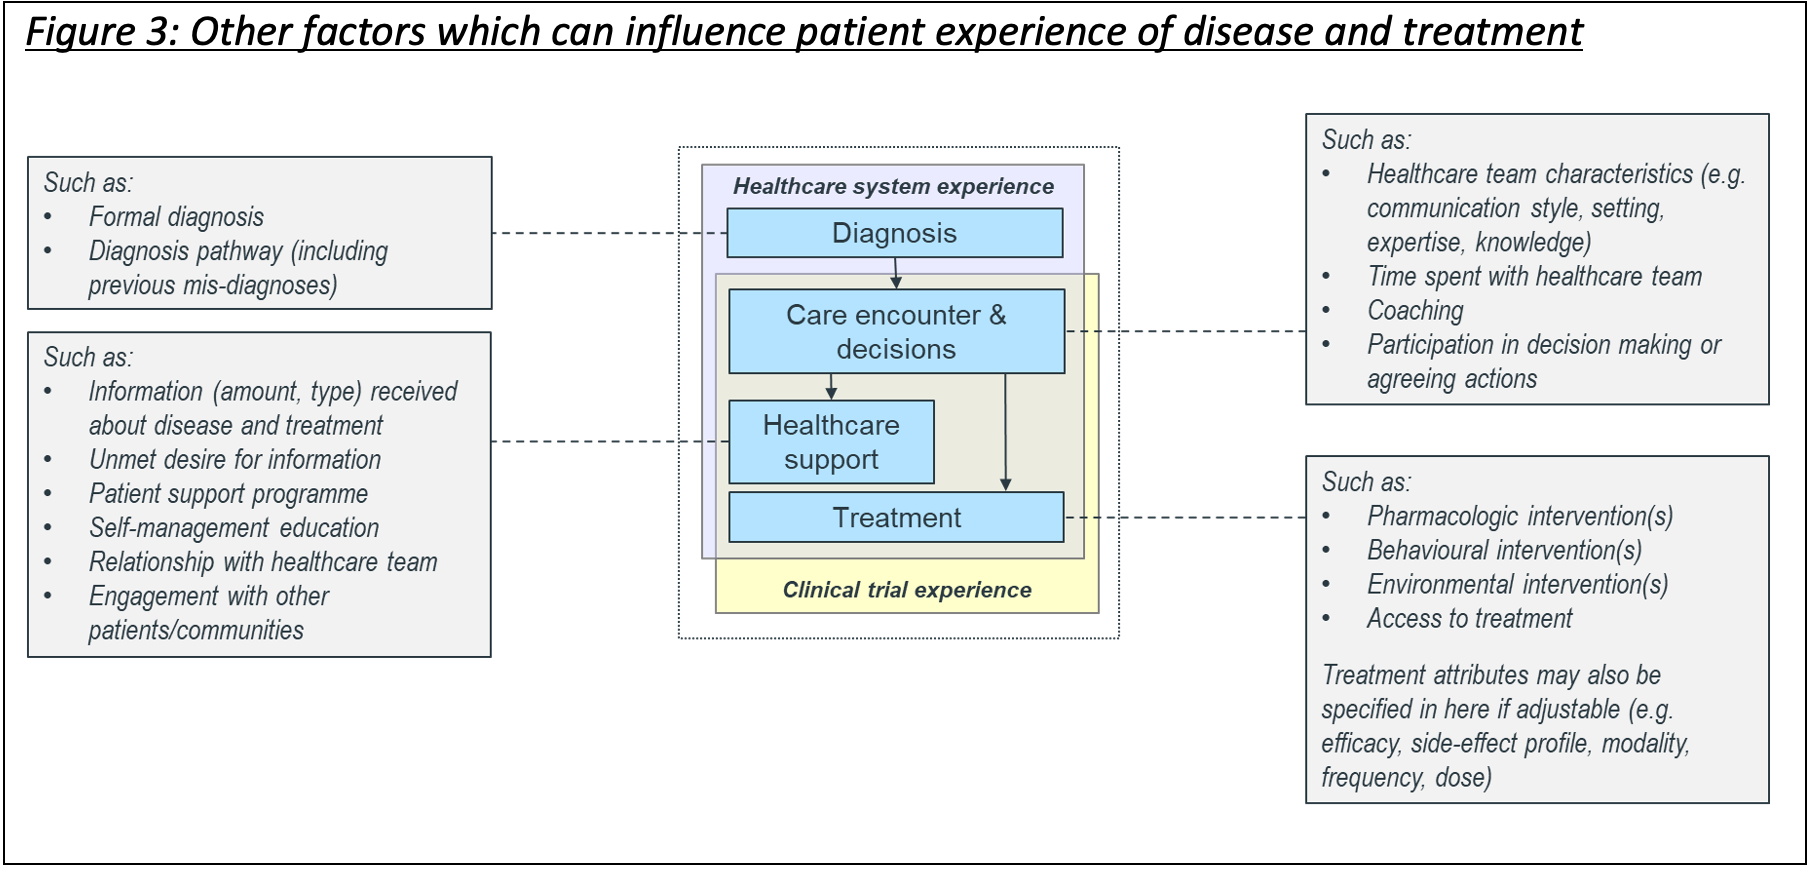 Figure 3: Other factors which can influence patient experience of disease and treatment